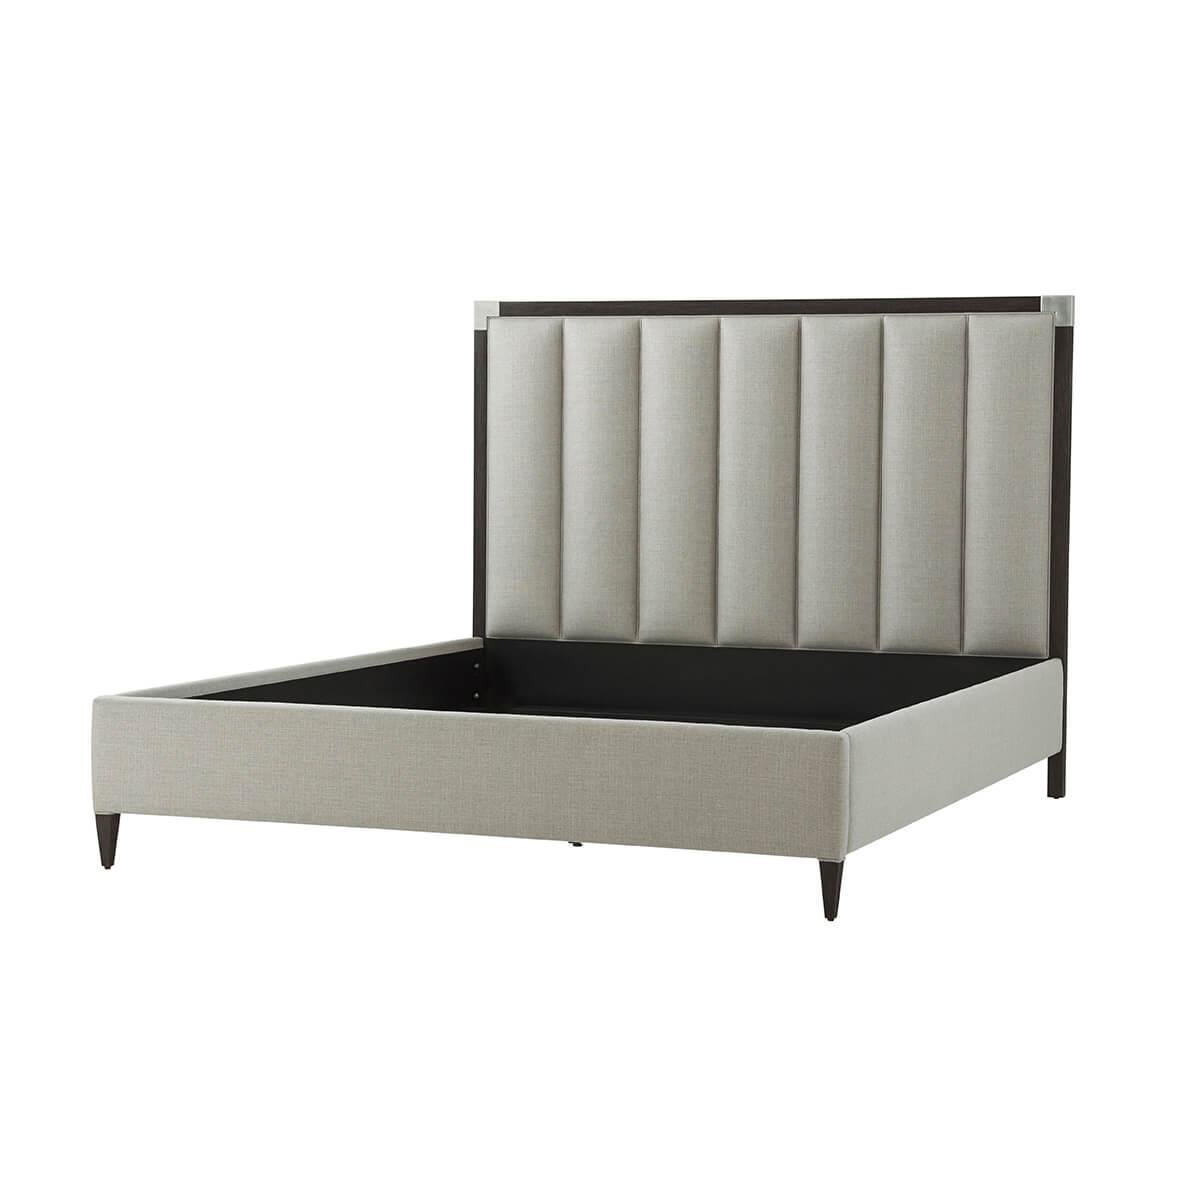 With our Anise finish frame and brushed Nickel finish corner mounts with a vertically channeled upholstered headboard, upholstered rails and raised on tapered legs.

Dimensions: 76.25